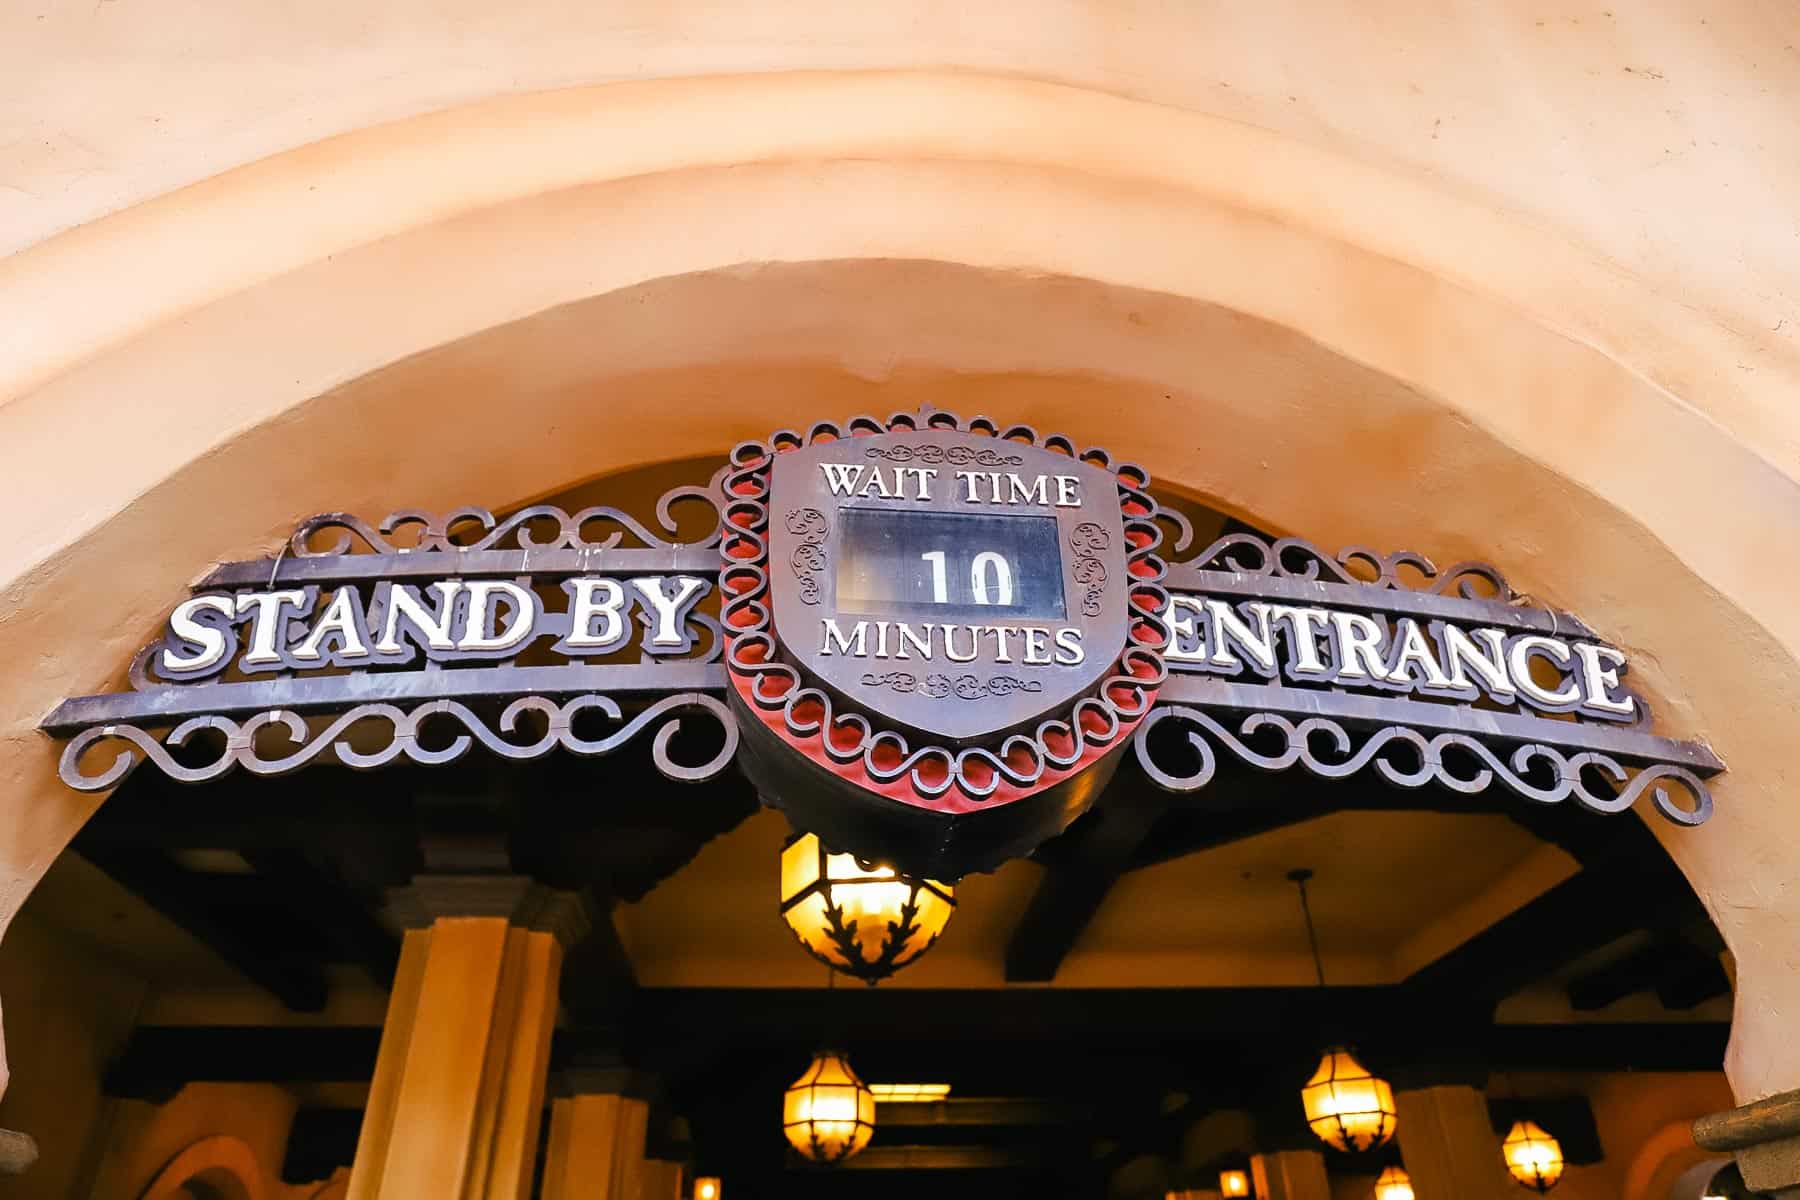 Stand-by entrance with a posted wait time of 10 minutes for Pirates of the Caribbean. 